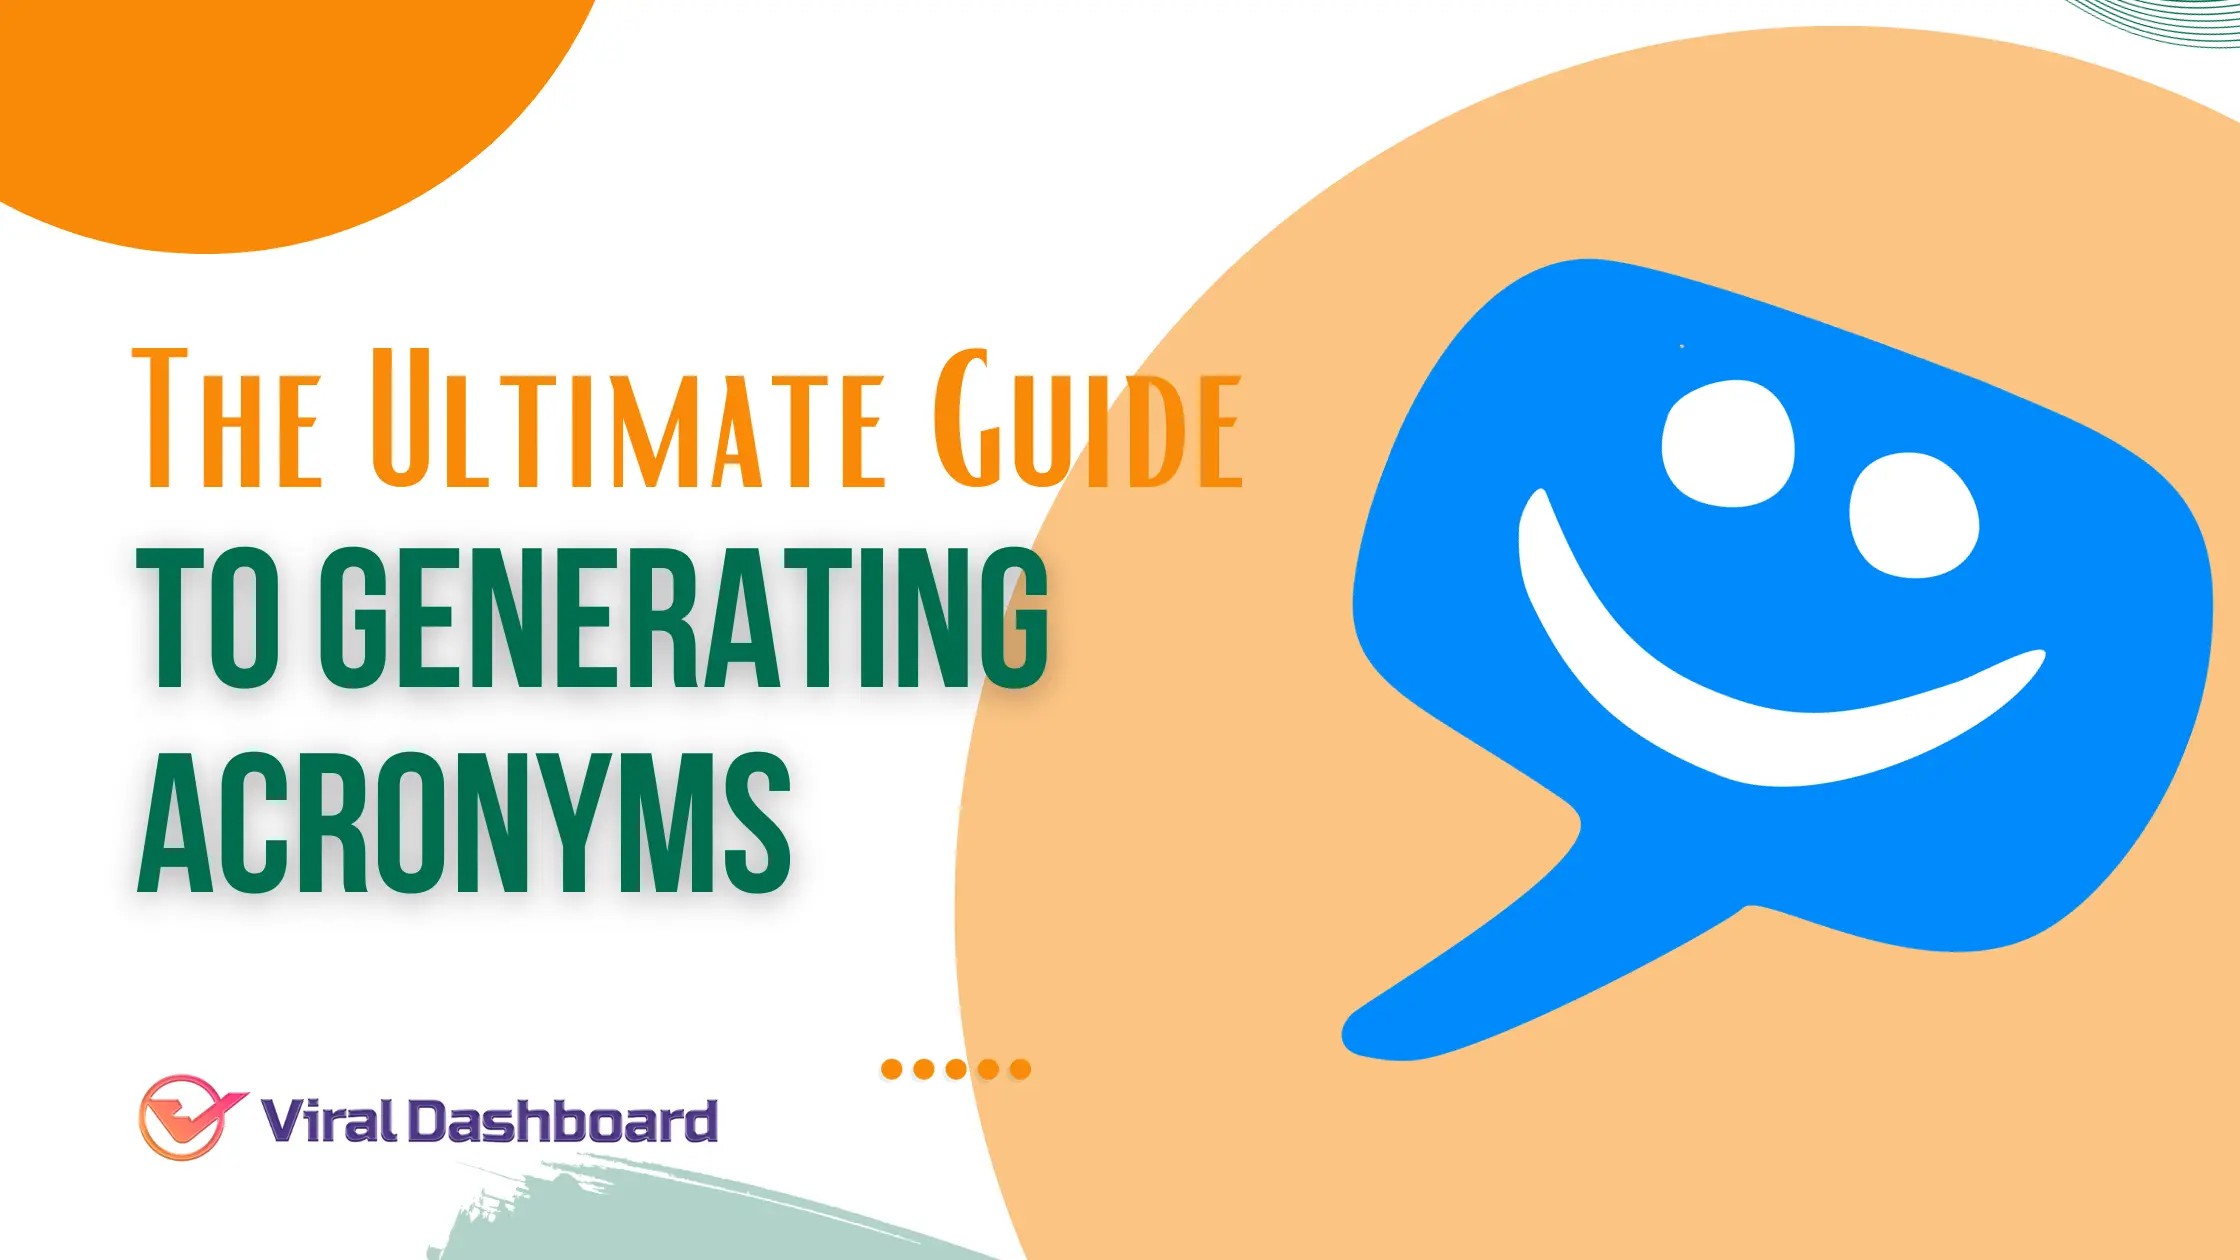 The Ultimate Guide to Generating Acronyms